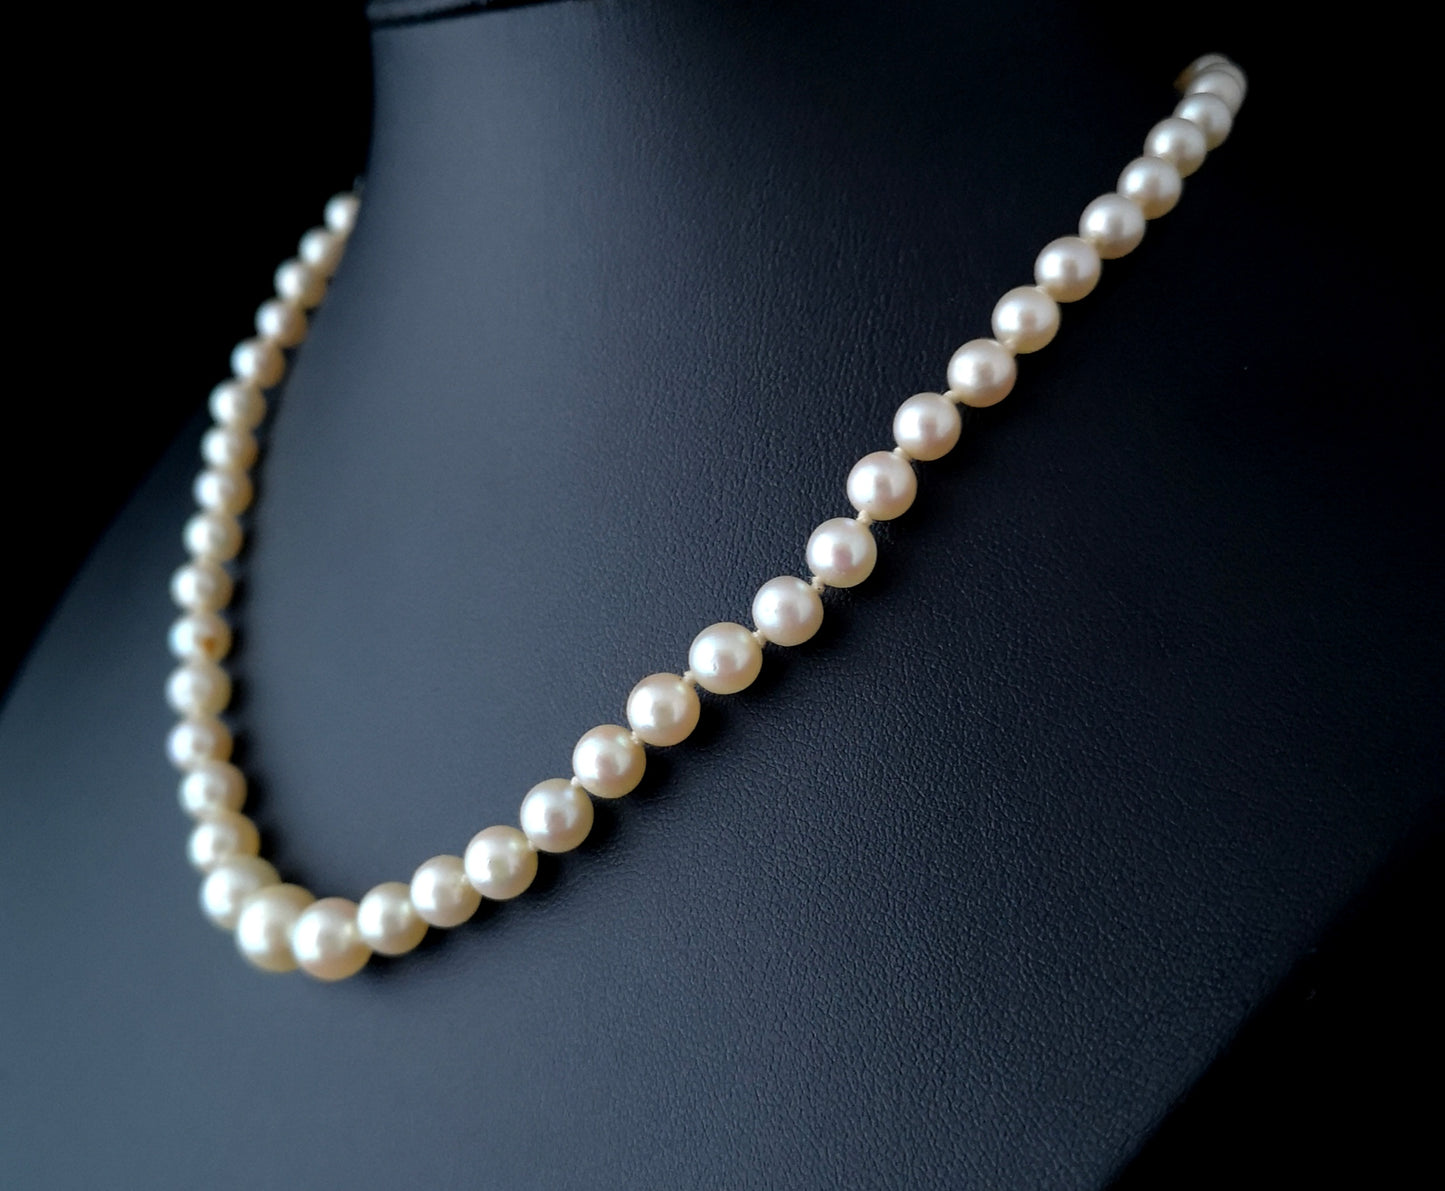 Art Deco pearl necklace, 14k white gold and diamond